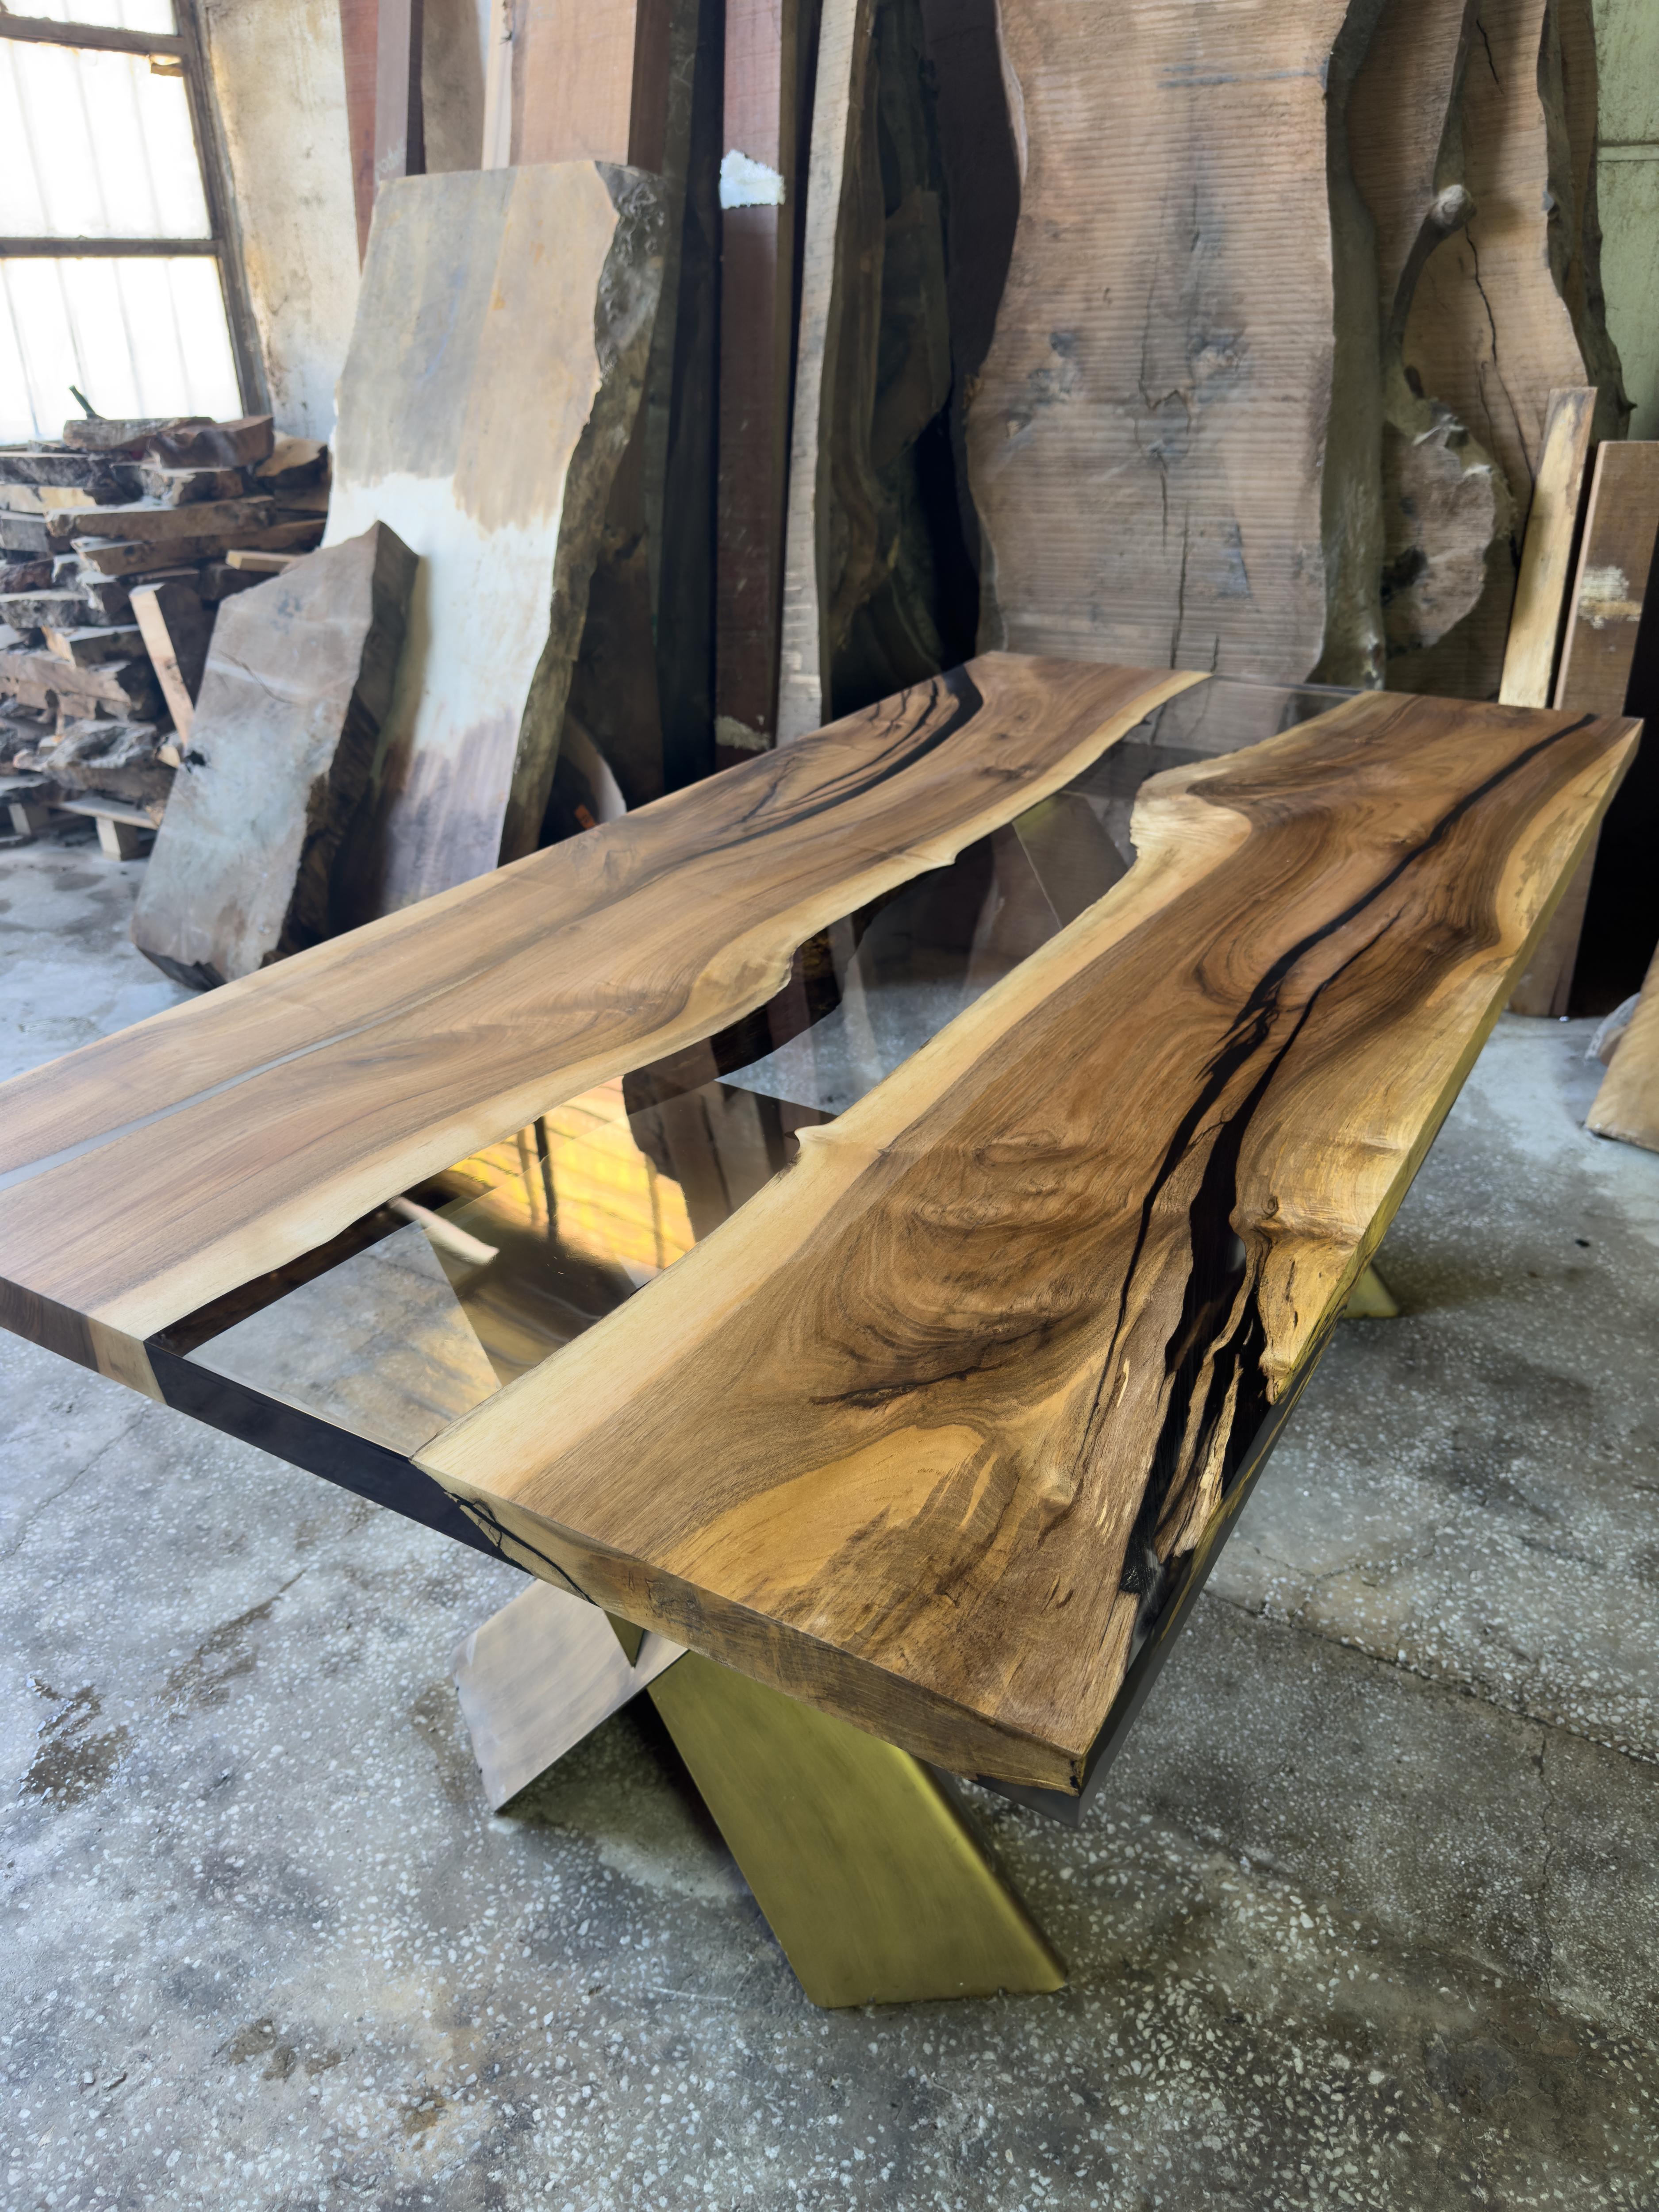 Walnut Custom Clear Epoxy Resin Dining Table 

This table is made of 500 years old Walnut Wood. The grains and texture of the wood describe what a natural walnut woods looks like.
It can be used as a dining table or as a conference table. Suitable